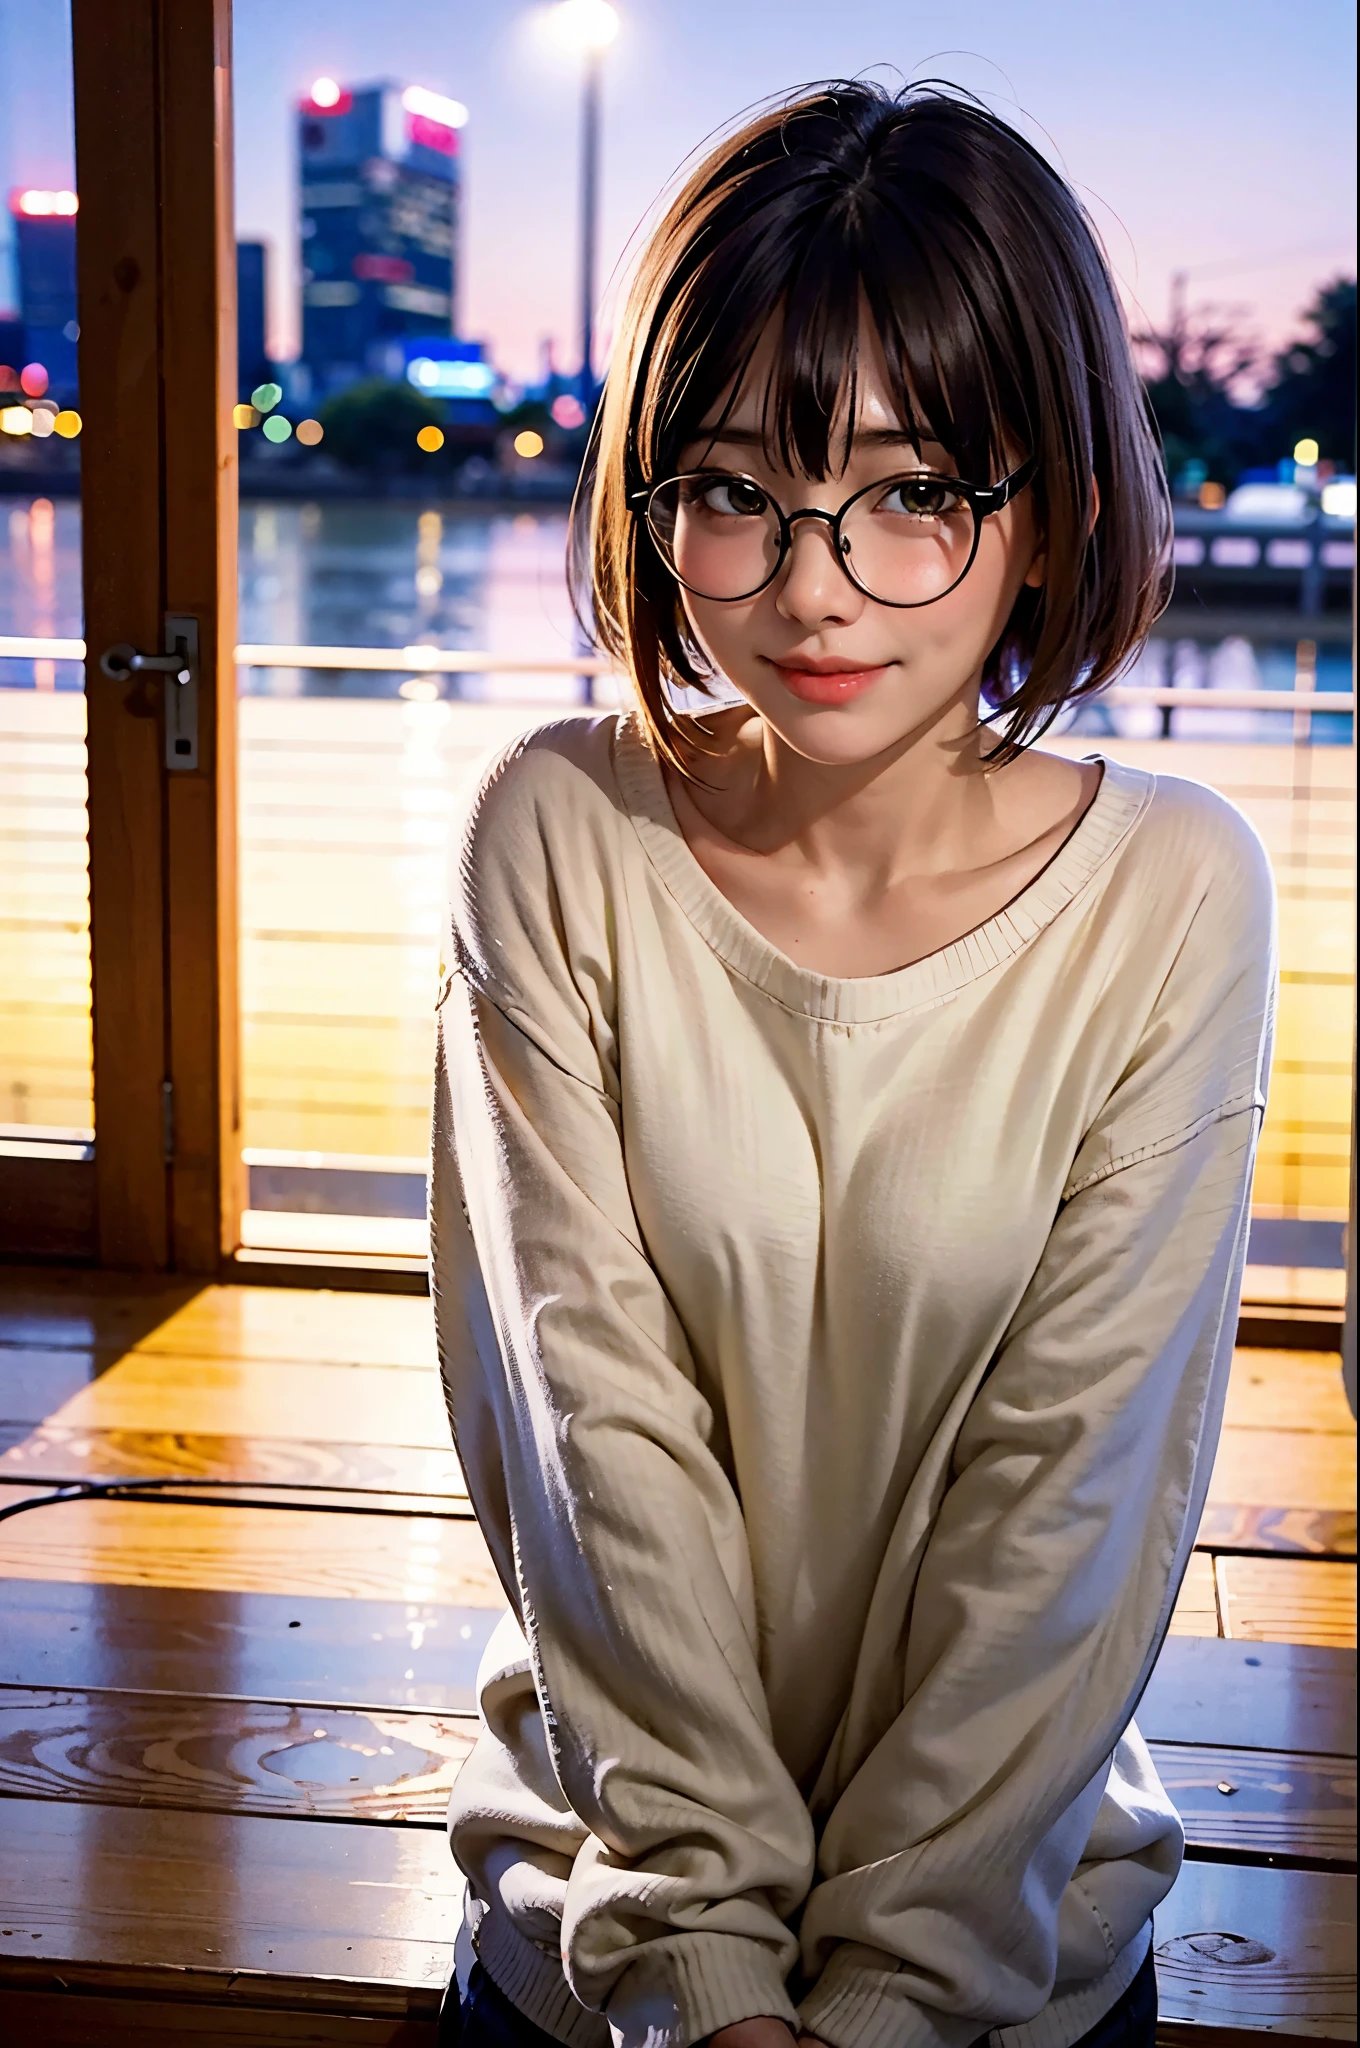 Japan girls in casual clothes、pay attention to your audience、Tokyo cityscape at night、(highest quality、master masterpiece)))、HD Fine、very detailed、master masterpiece、movie lighting、(8K、highest quality、master masterpiece:1.2)、(realistic、Photoreal:1.37) high resolution、Super detailed、woman wearing glasses、Silent look、round glasses、Asian, cute, cute顔, alone, short hair 1.2, rough skin, Beautiful smile, Beautiful and detailed night sky, night scenery, movie lighting, Depth of bounds written, lens flare light、date、(blush your nose)、、(closed your mouth)small breasts、Beautiful eye for detail、(sweater:1.1)、floating hair nova frog style